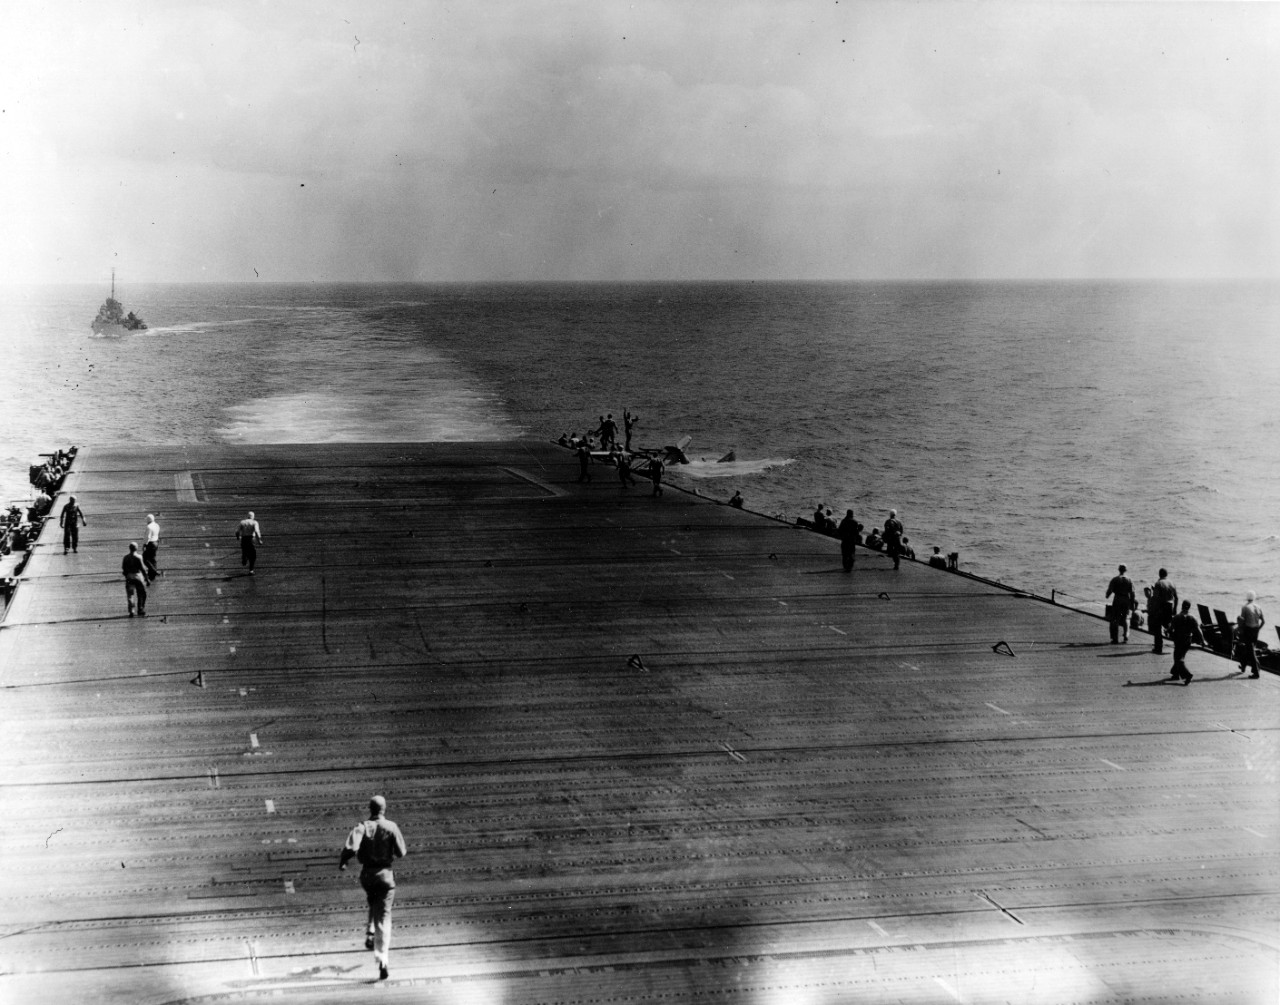 Lt. Cmdr. Eugene E. Lindsey’s Douglas TBD-1 Devastator (BuNo. 0370) sinks astern of Enterprise after a deck landing accident, 28 May 1942. Monaghan steams as the plane guard destroyer in the left background, and rescues Lindsey and his crew. Ente...